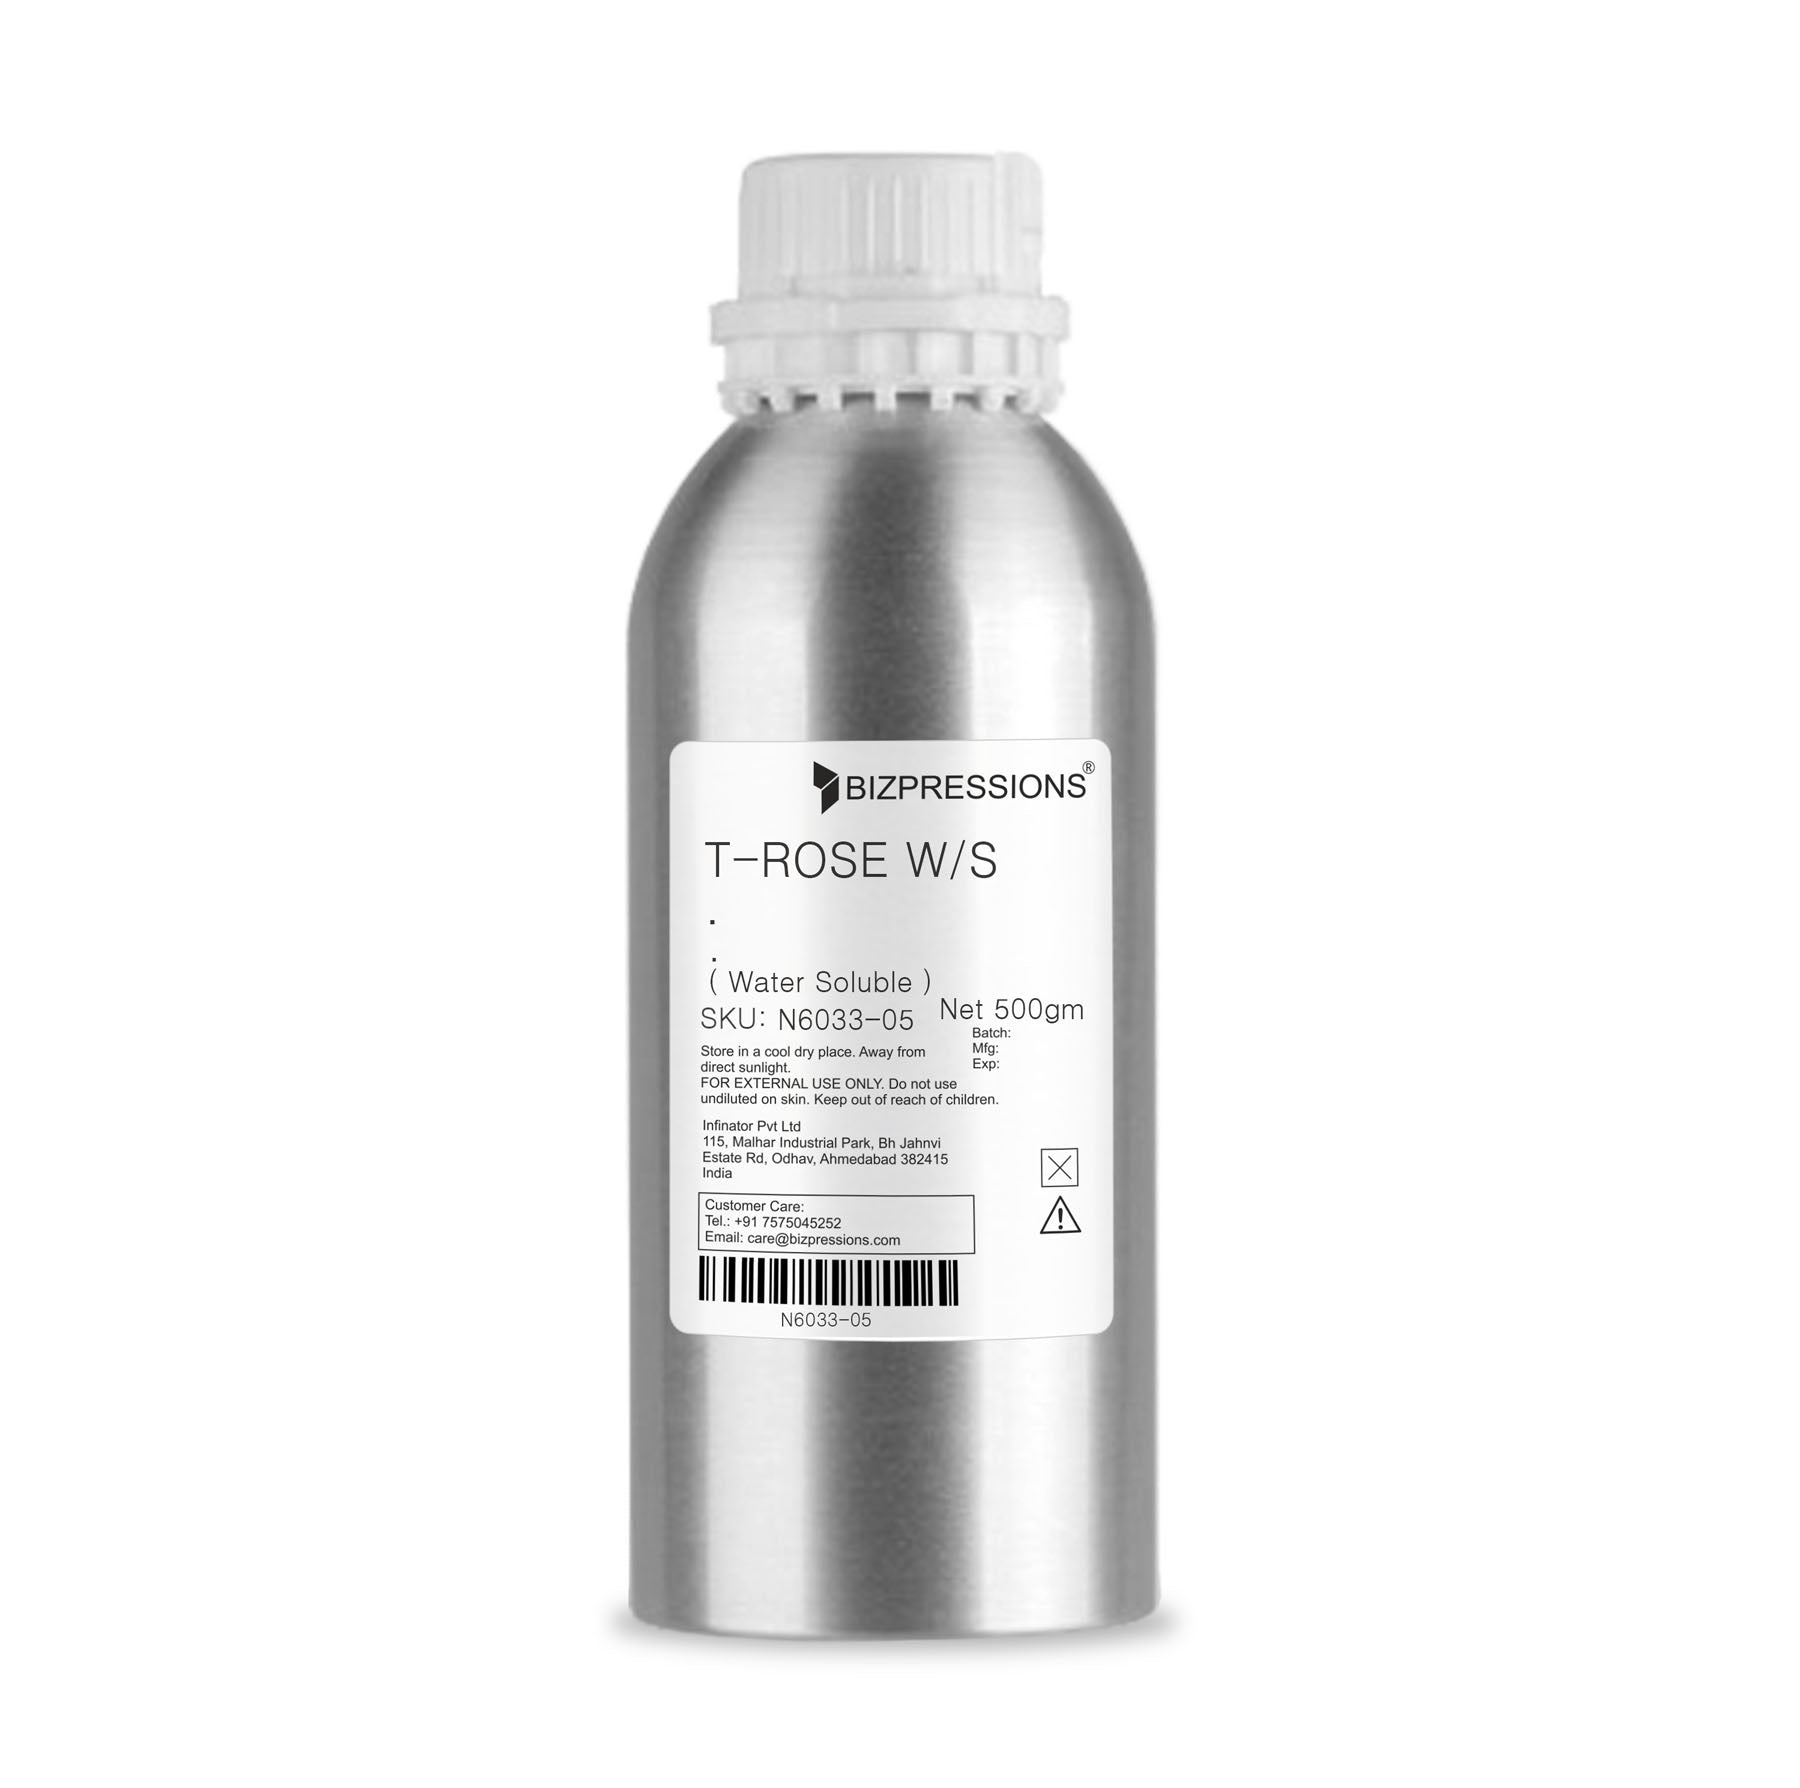 T-ROSE W/S - Fragrance ( Water Soluble ) - 500 gm